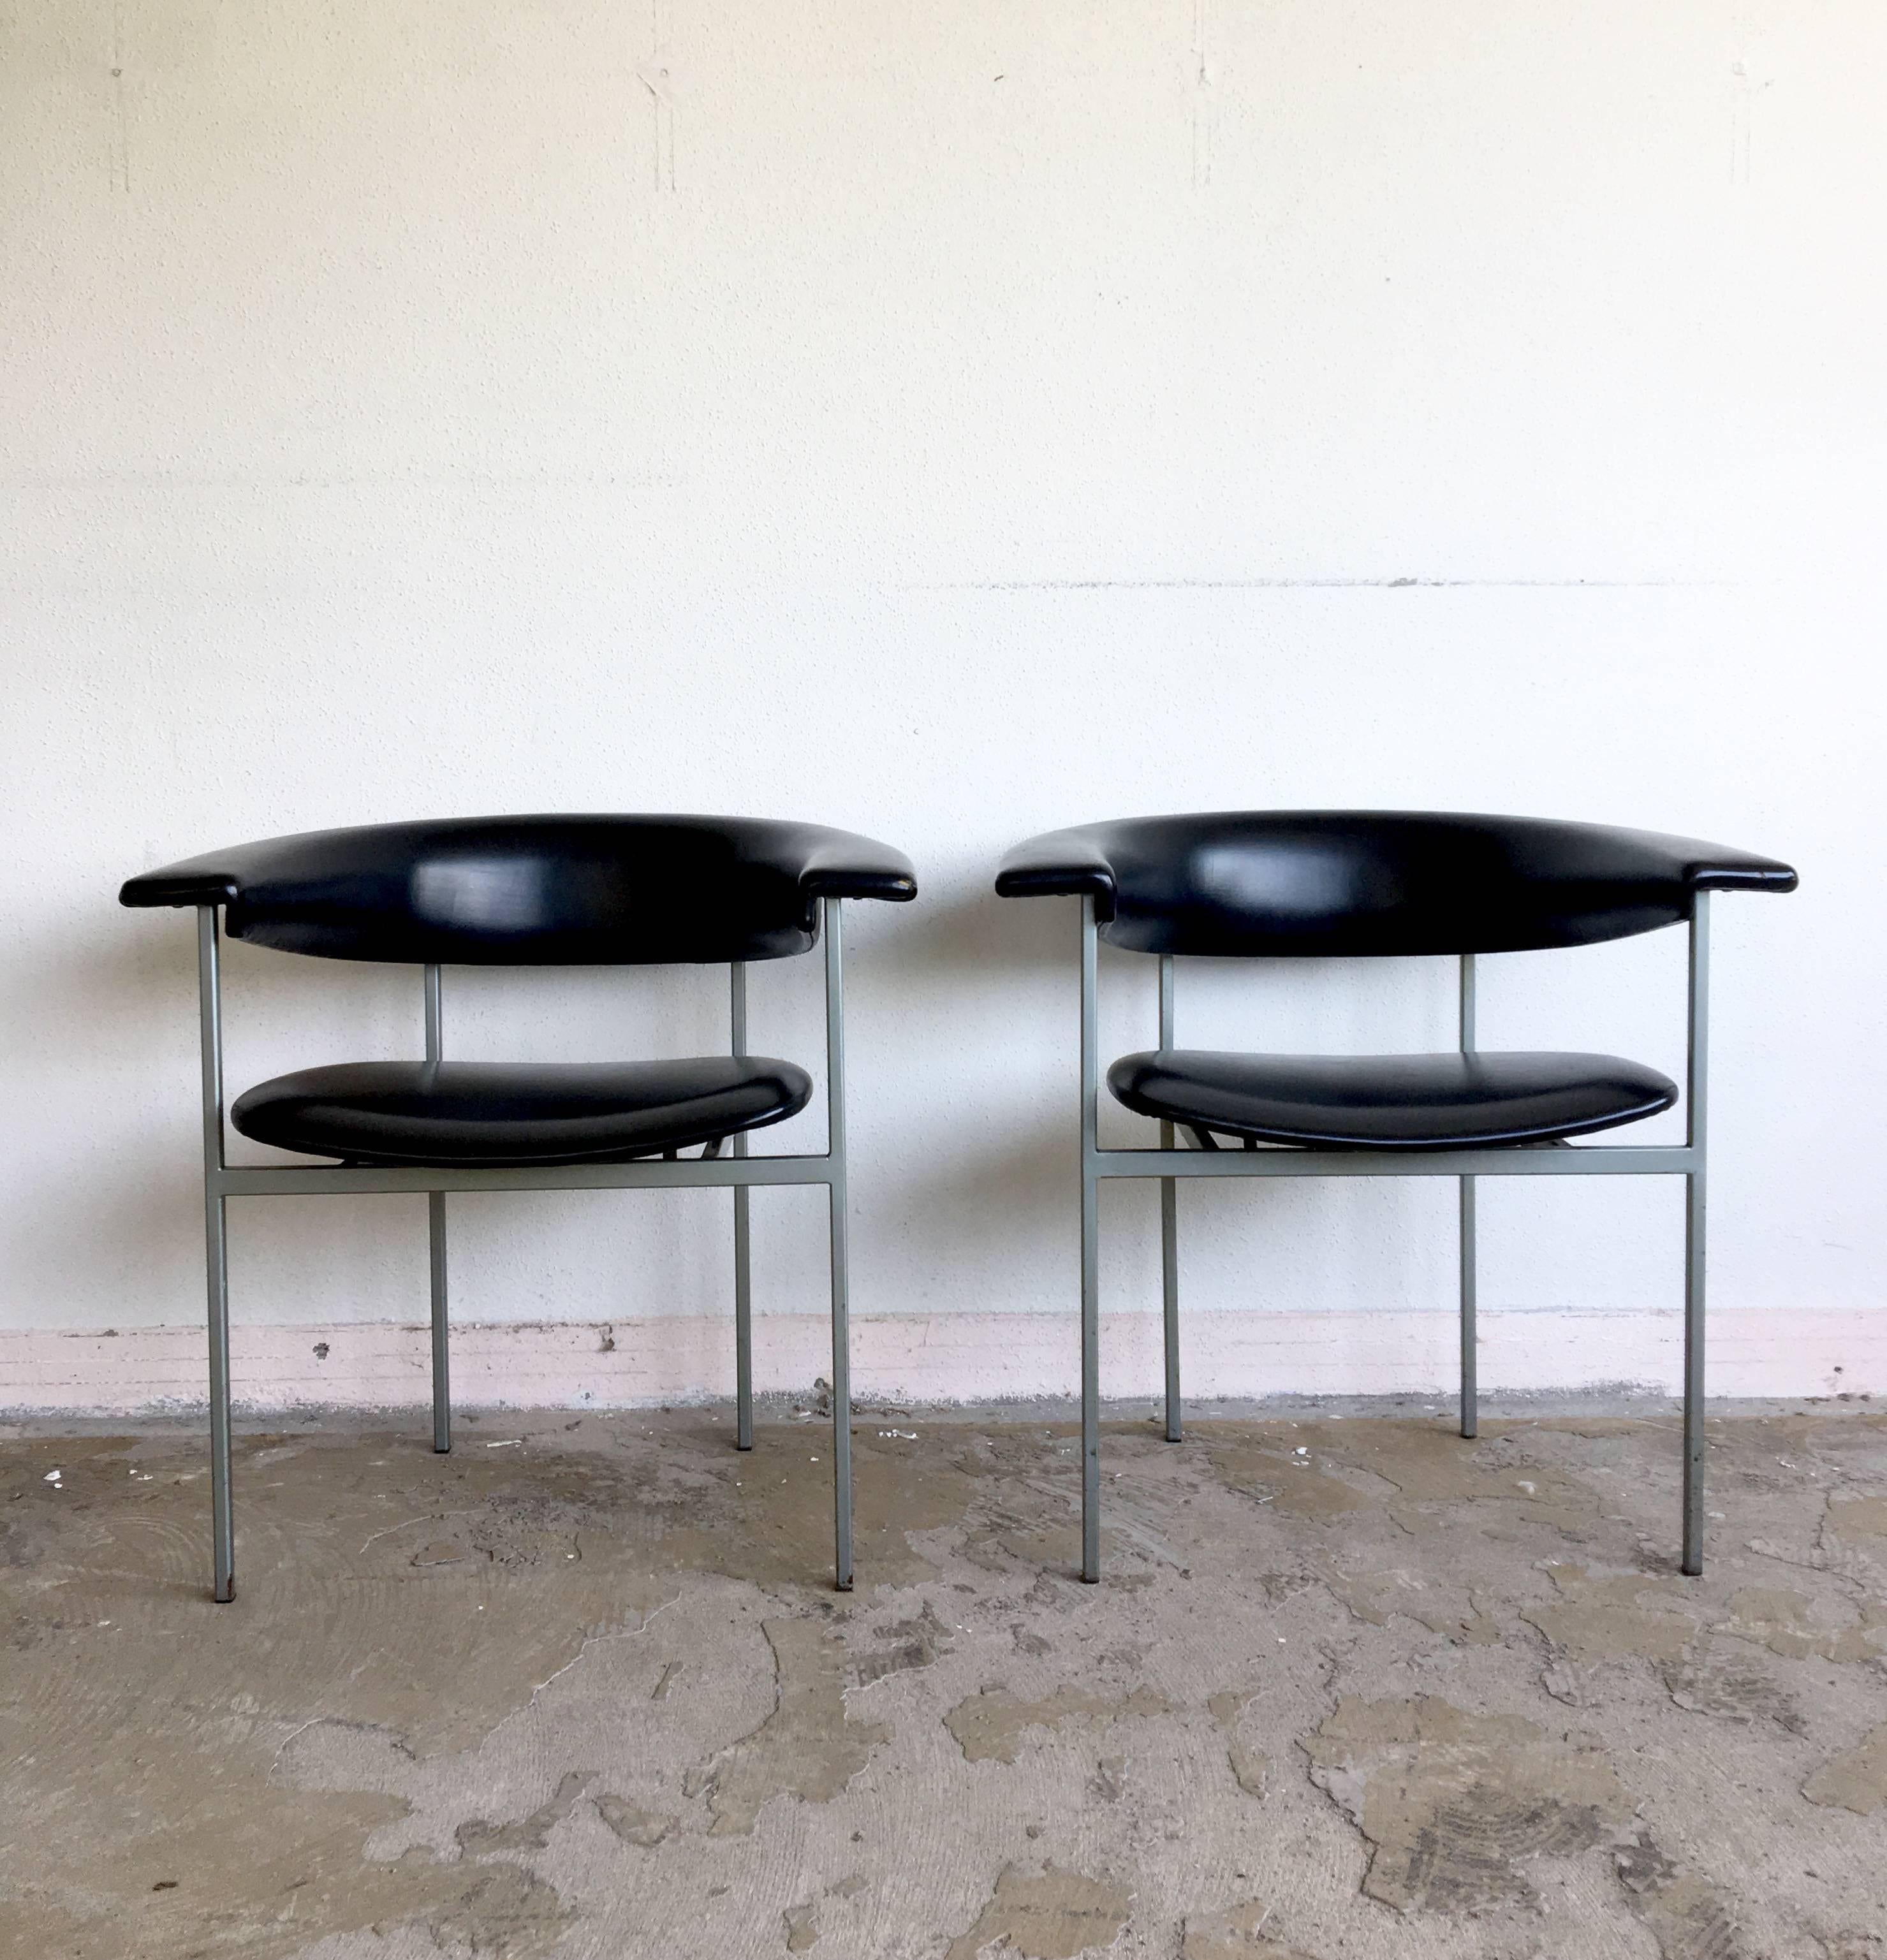 This pair of Dutch Minimalist armchairs were designed by Rudolf Wolf for Gaasbeek-Van Tiel in the early 1960s. The chairs come from the Meander series and feature a grey metal base with Black faux leather upholstery. The Gamma Club chair was named,